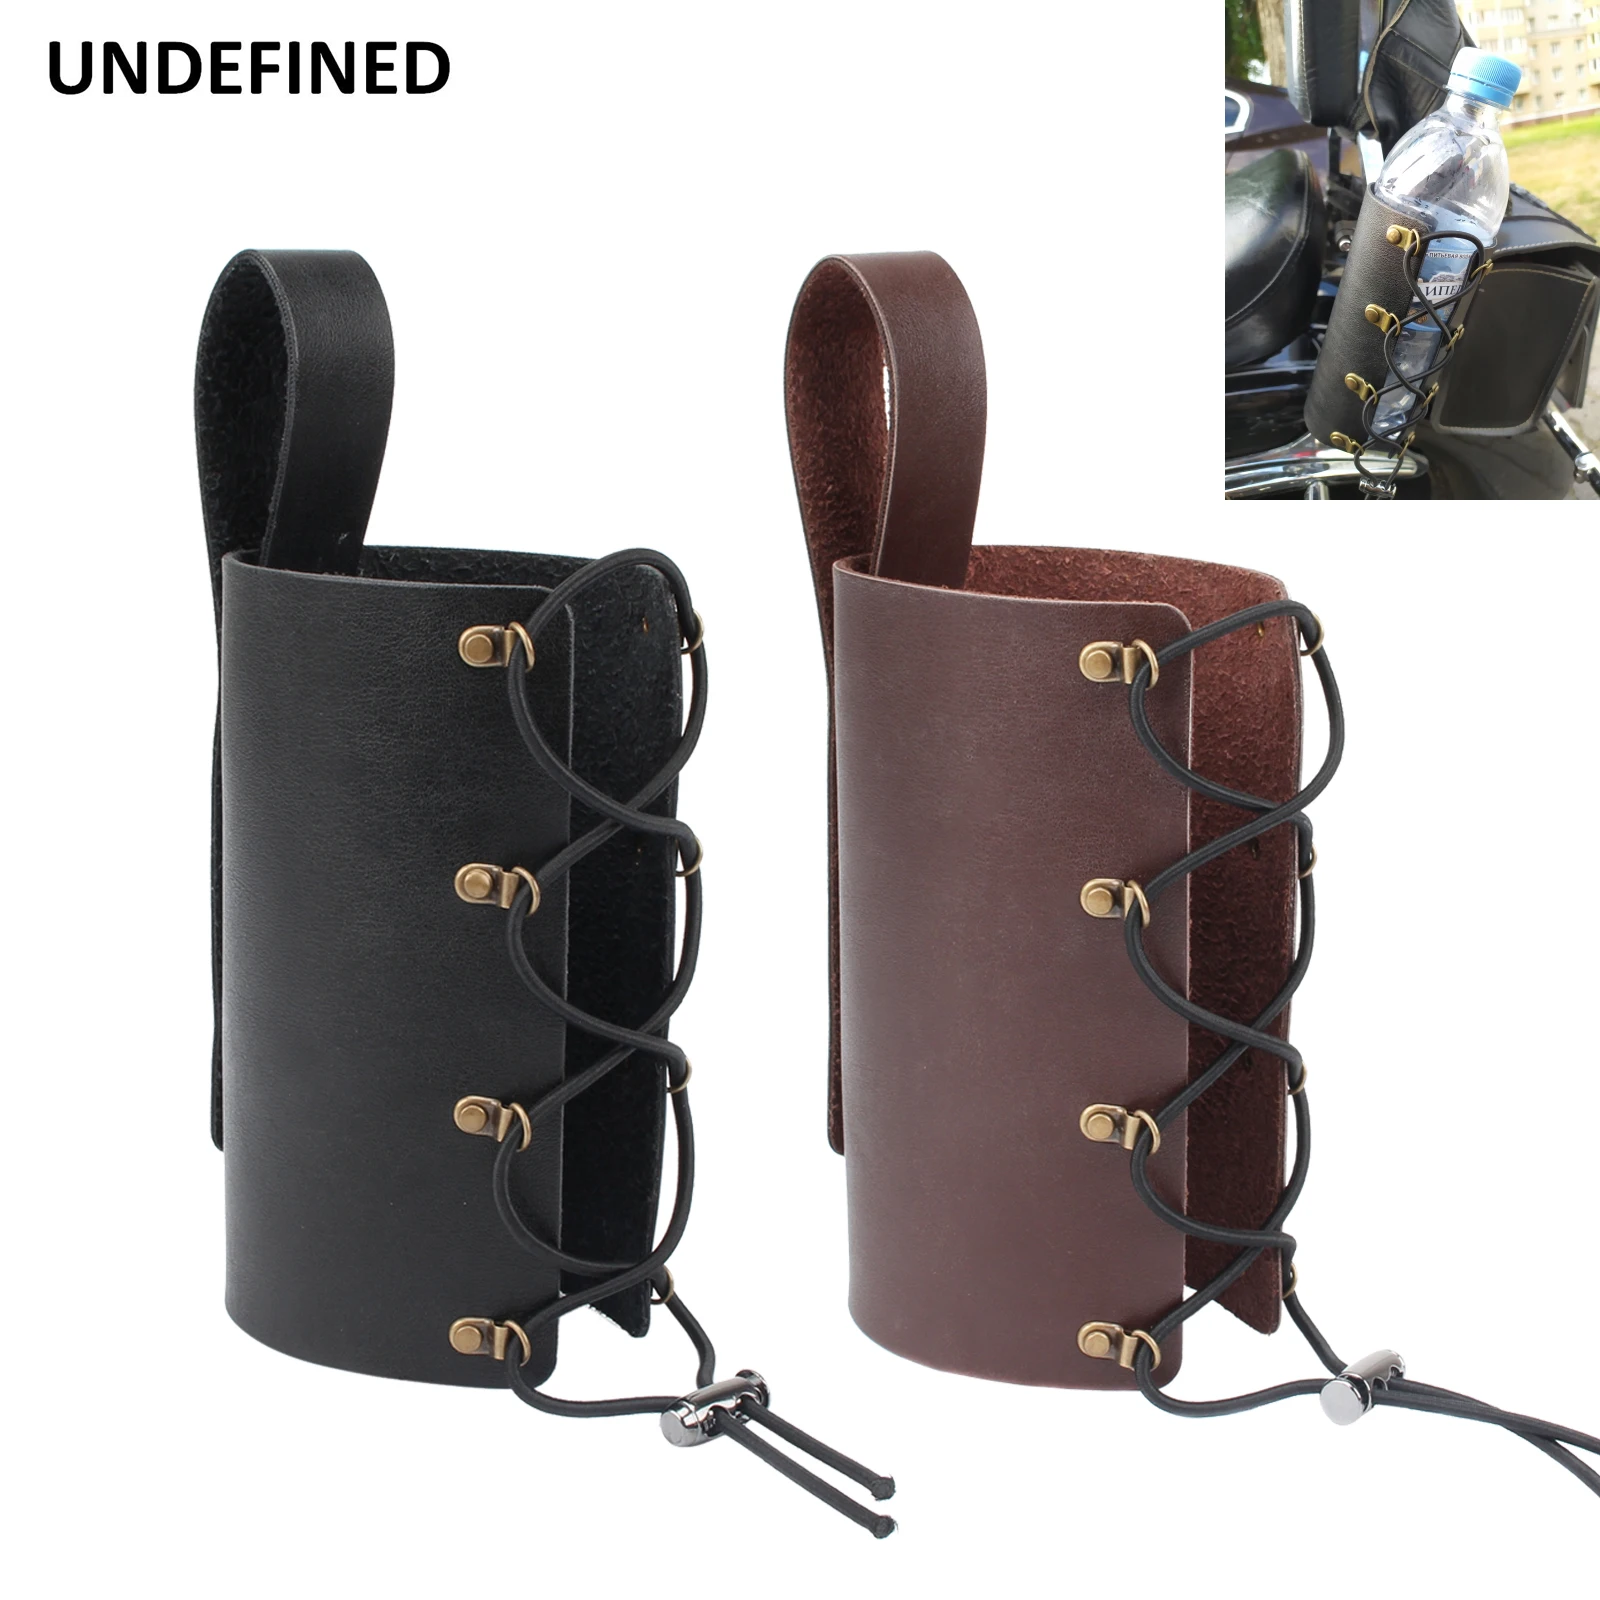 Motorcycle Bicycle Drink Holder Leather Water Bottle Cup Holder Support Stand Car-styling Outdoor Sports Cup Adapter Universal